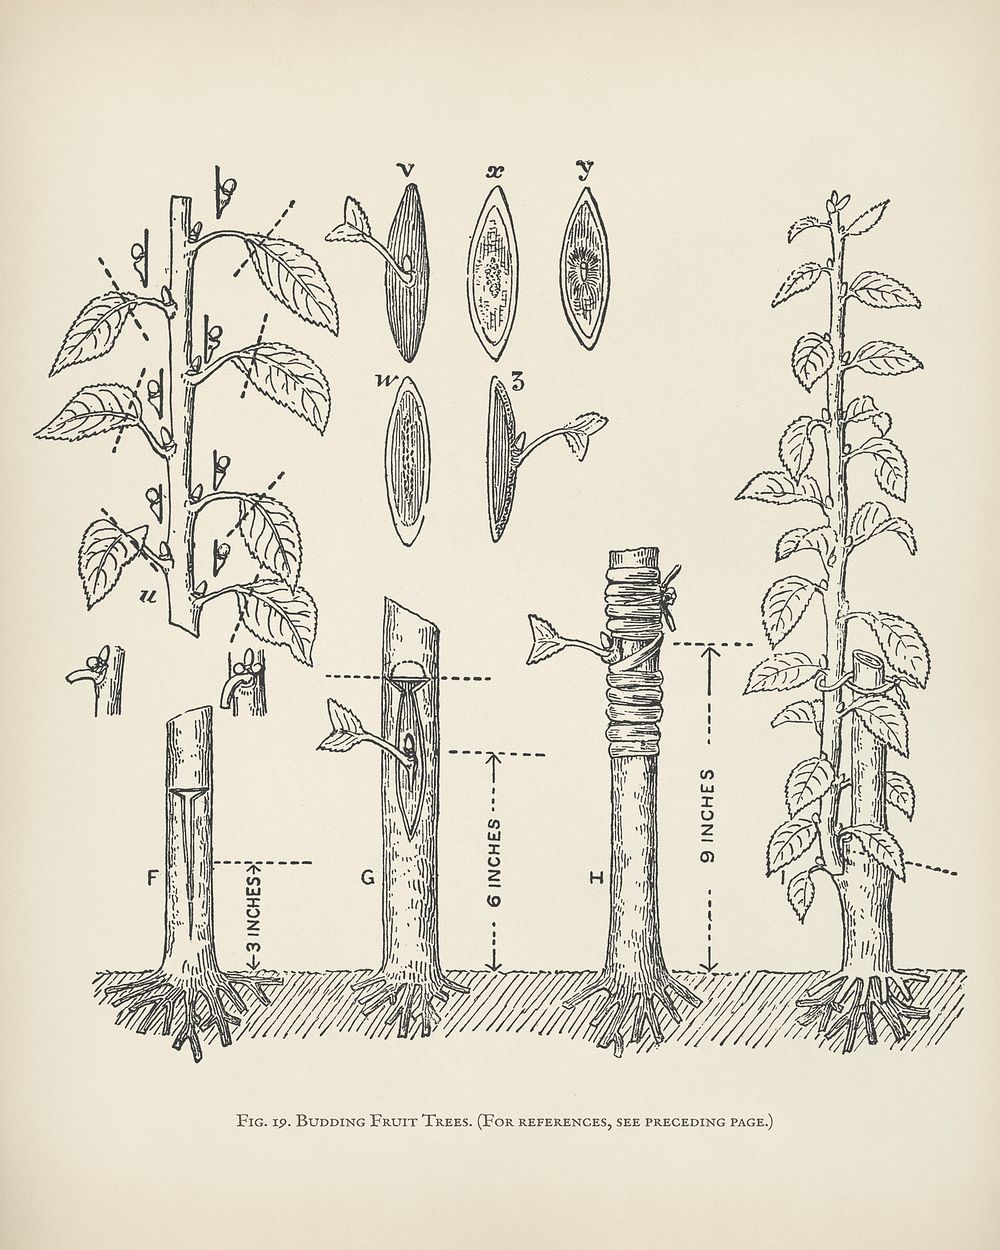 The fruit grower's guide : Vintage illustration of trees